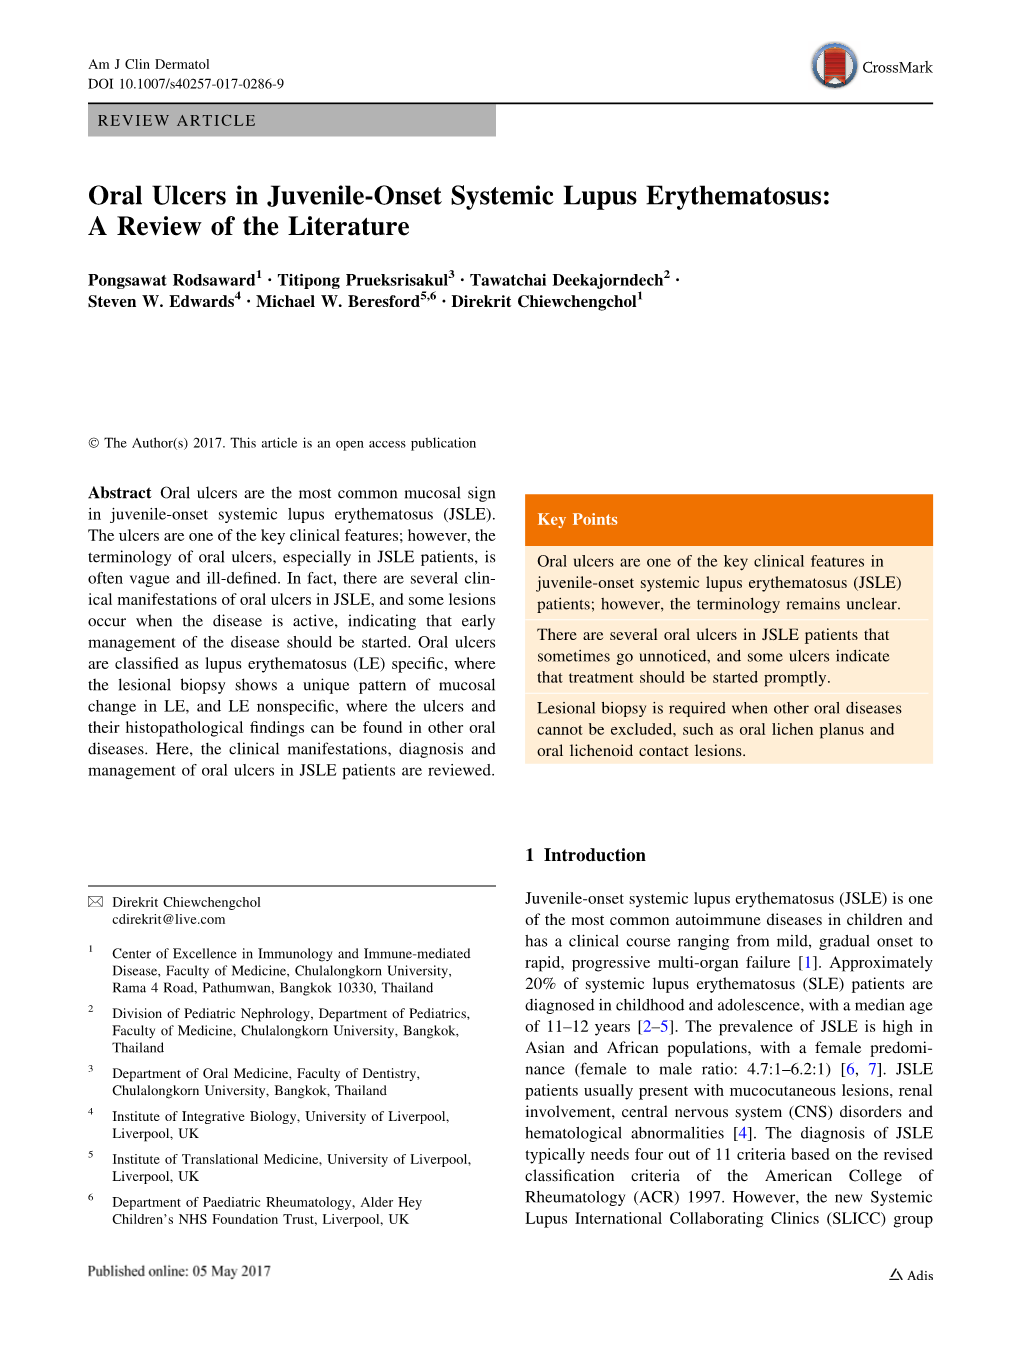 Oral Ulcers in Juvenile-Onset Systemic Lupus Erythematosus: a Review of the Literature